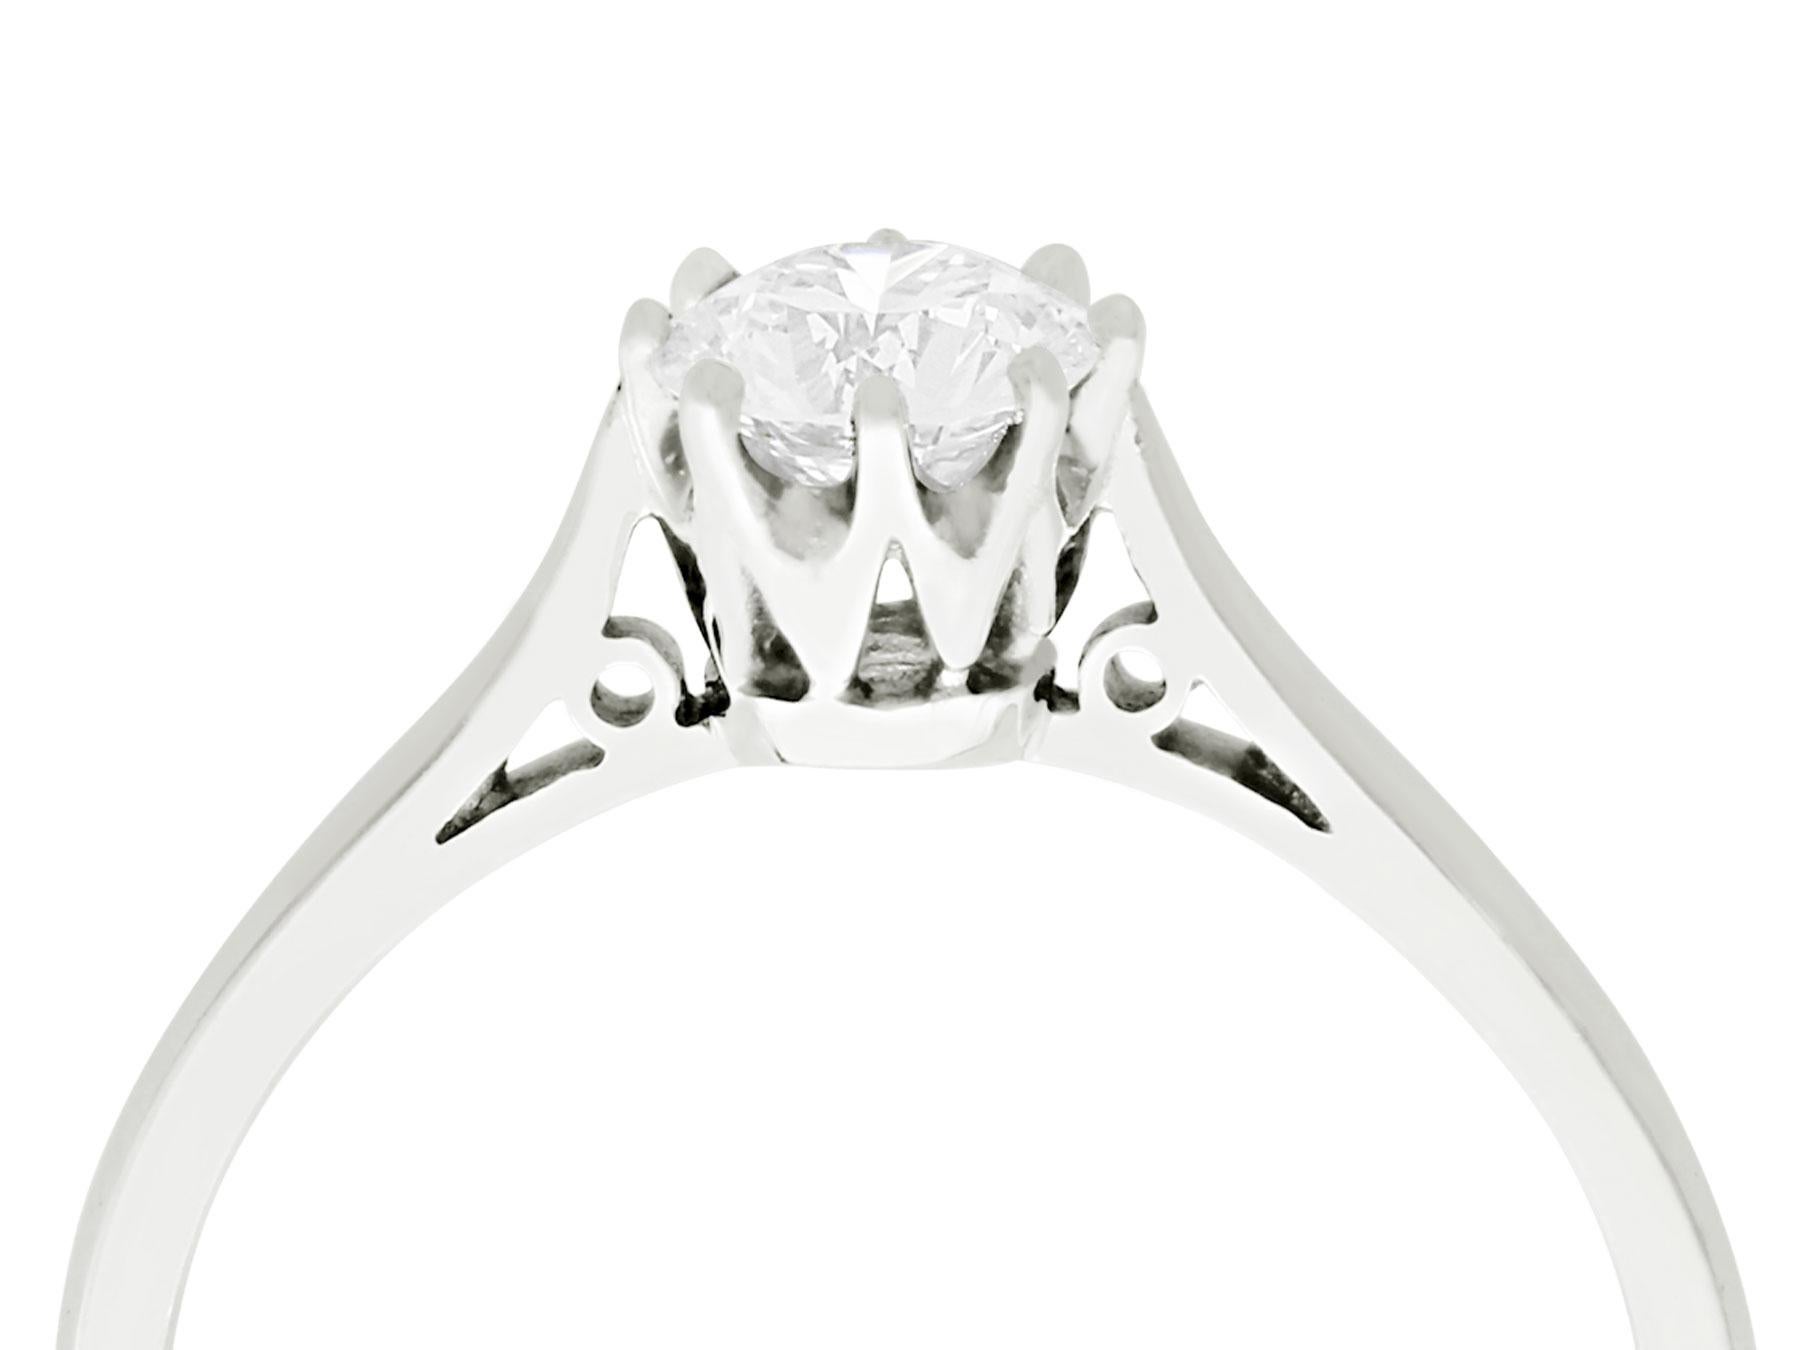 A fine and impressive vintage 0.57 carat diamond solitaire displayed in a contemporary platinum setting; part of our diamond jewelry/estate jewelry collections

This impressive vintage solitaire is displayed in a contemporary platinum setting.

The